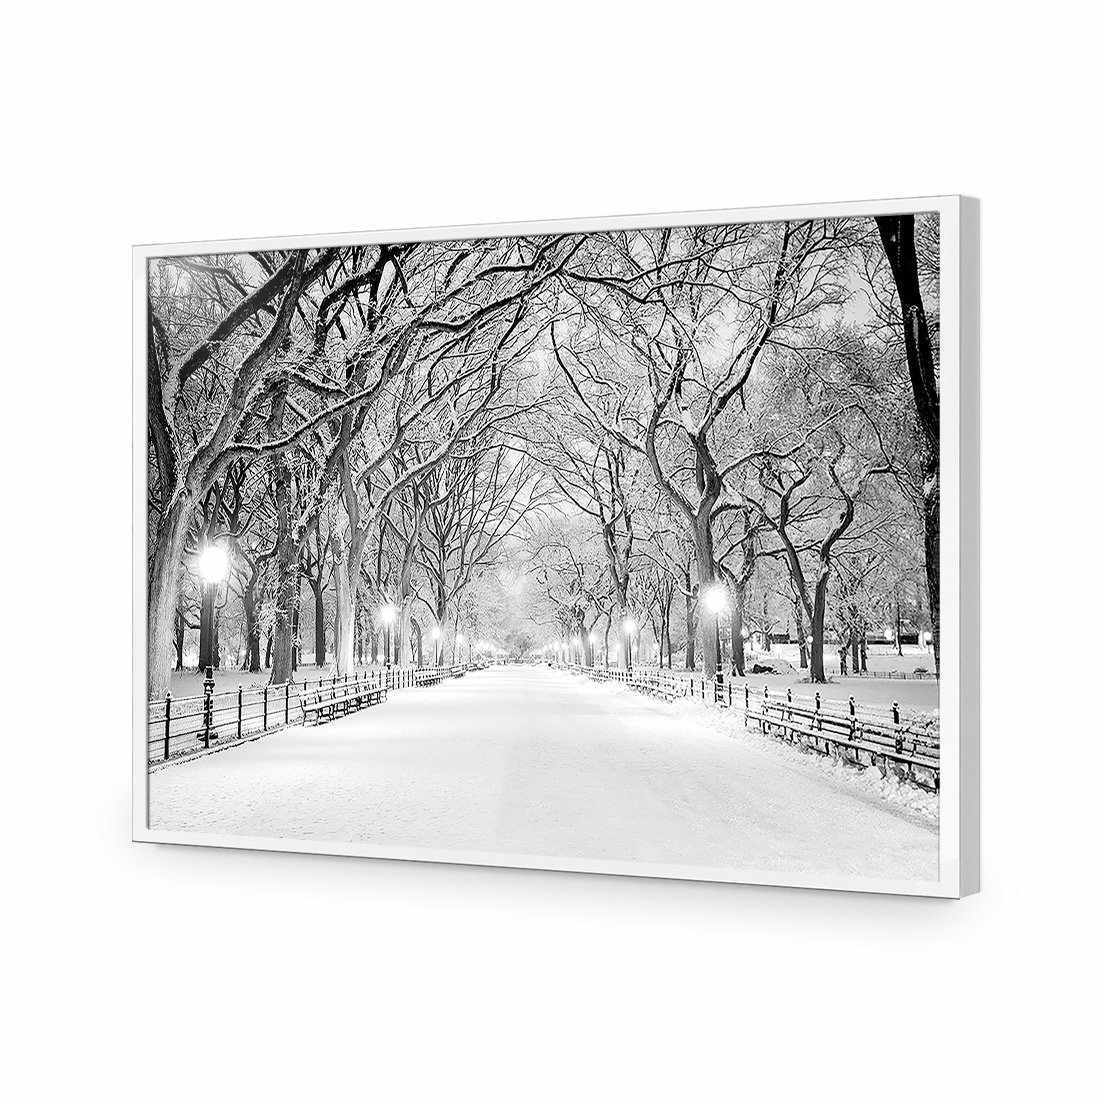 Central Park Dawn in Snow-Acrylic-Wall Art Design-Without Border-Acrylic - White Frame-45x30cm-Wall Art Designs